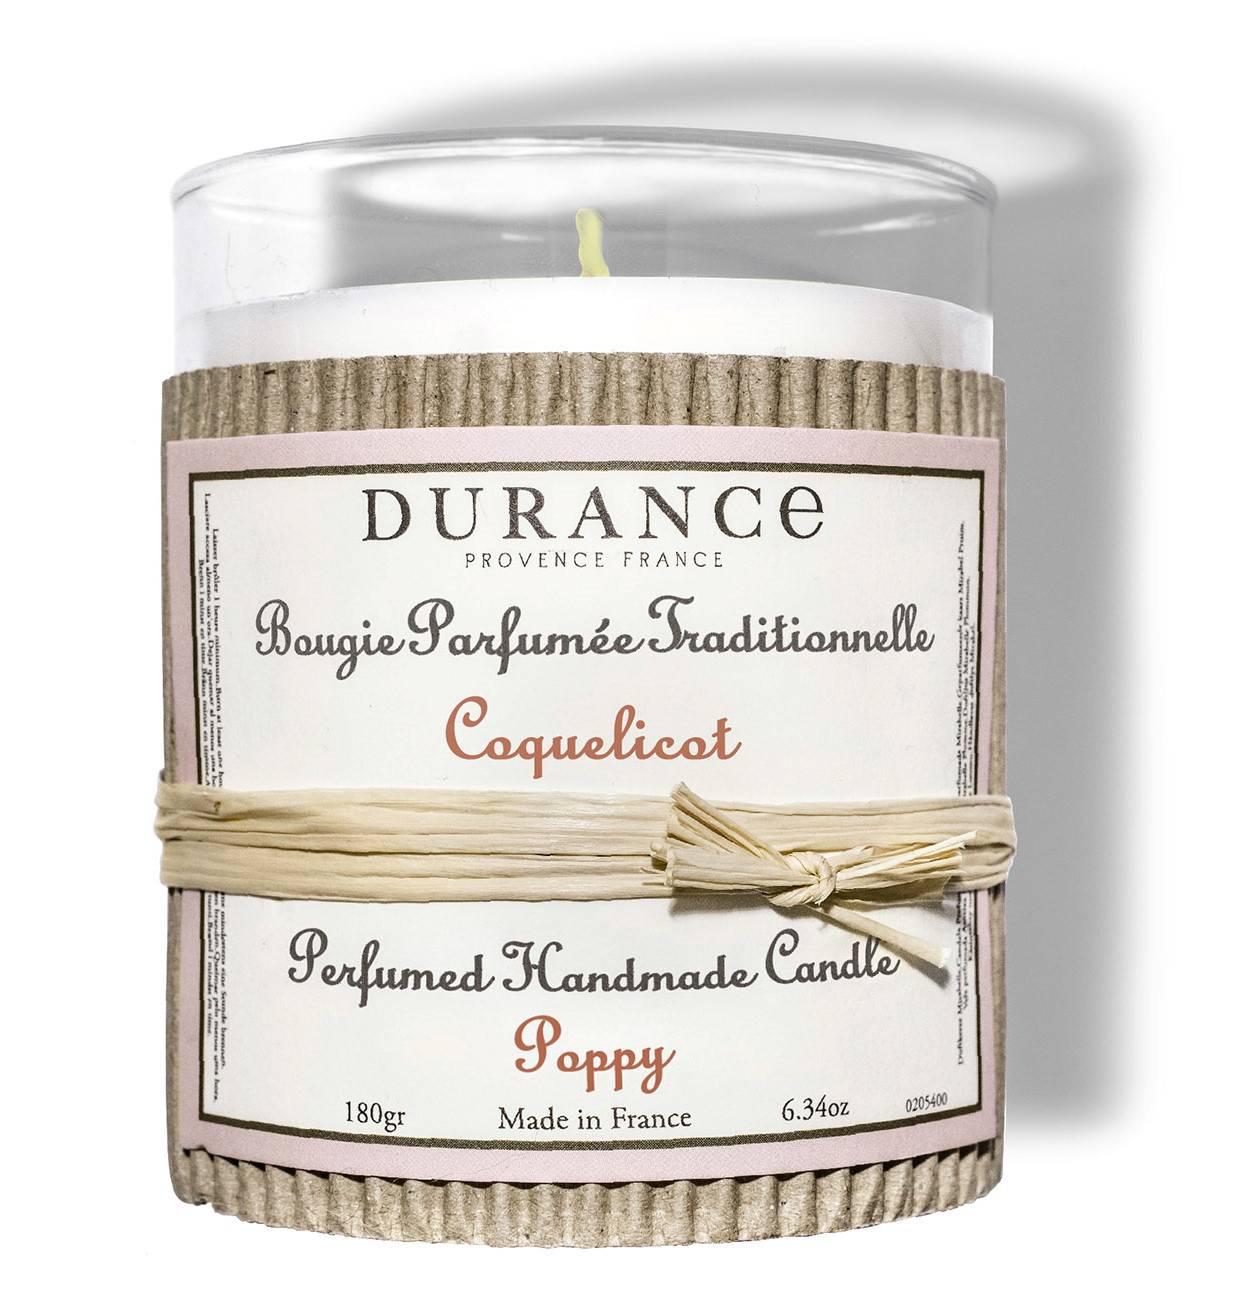 Bougie traditionnelle coquelicot 180g - Durance